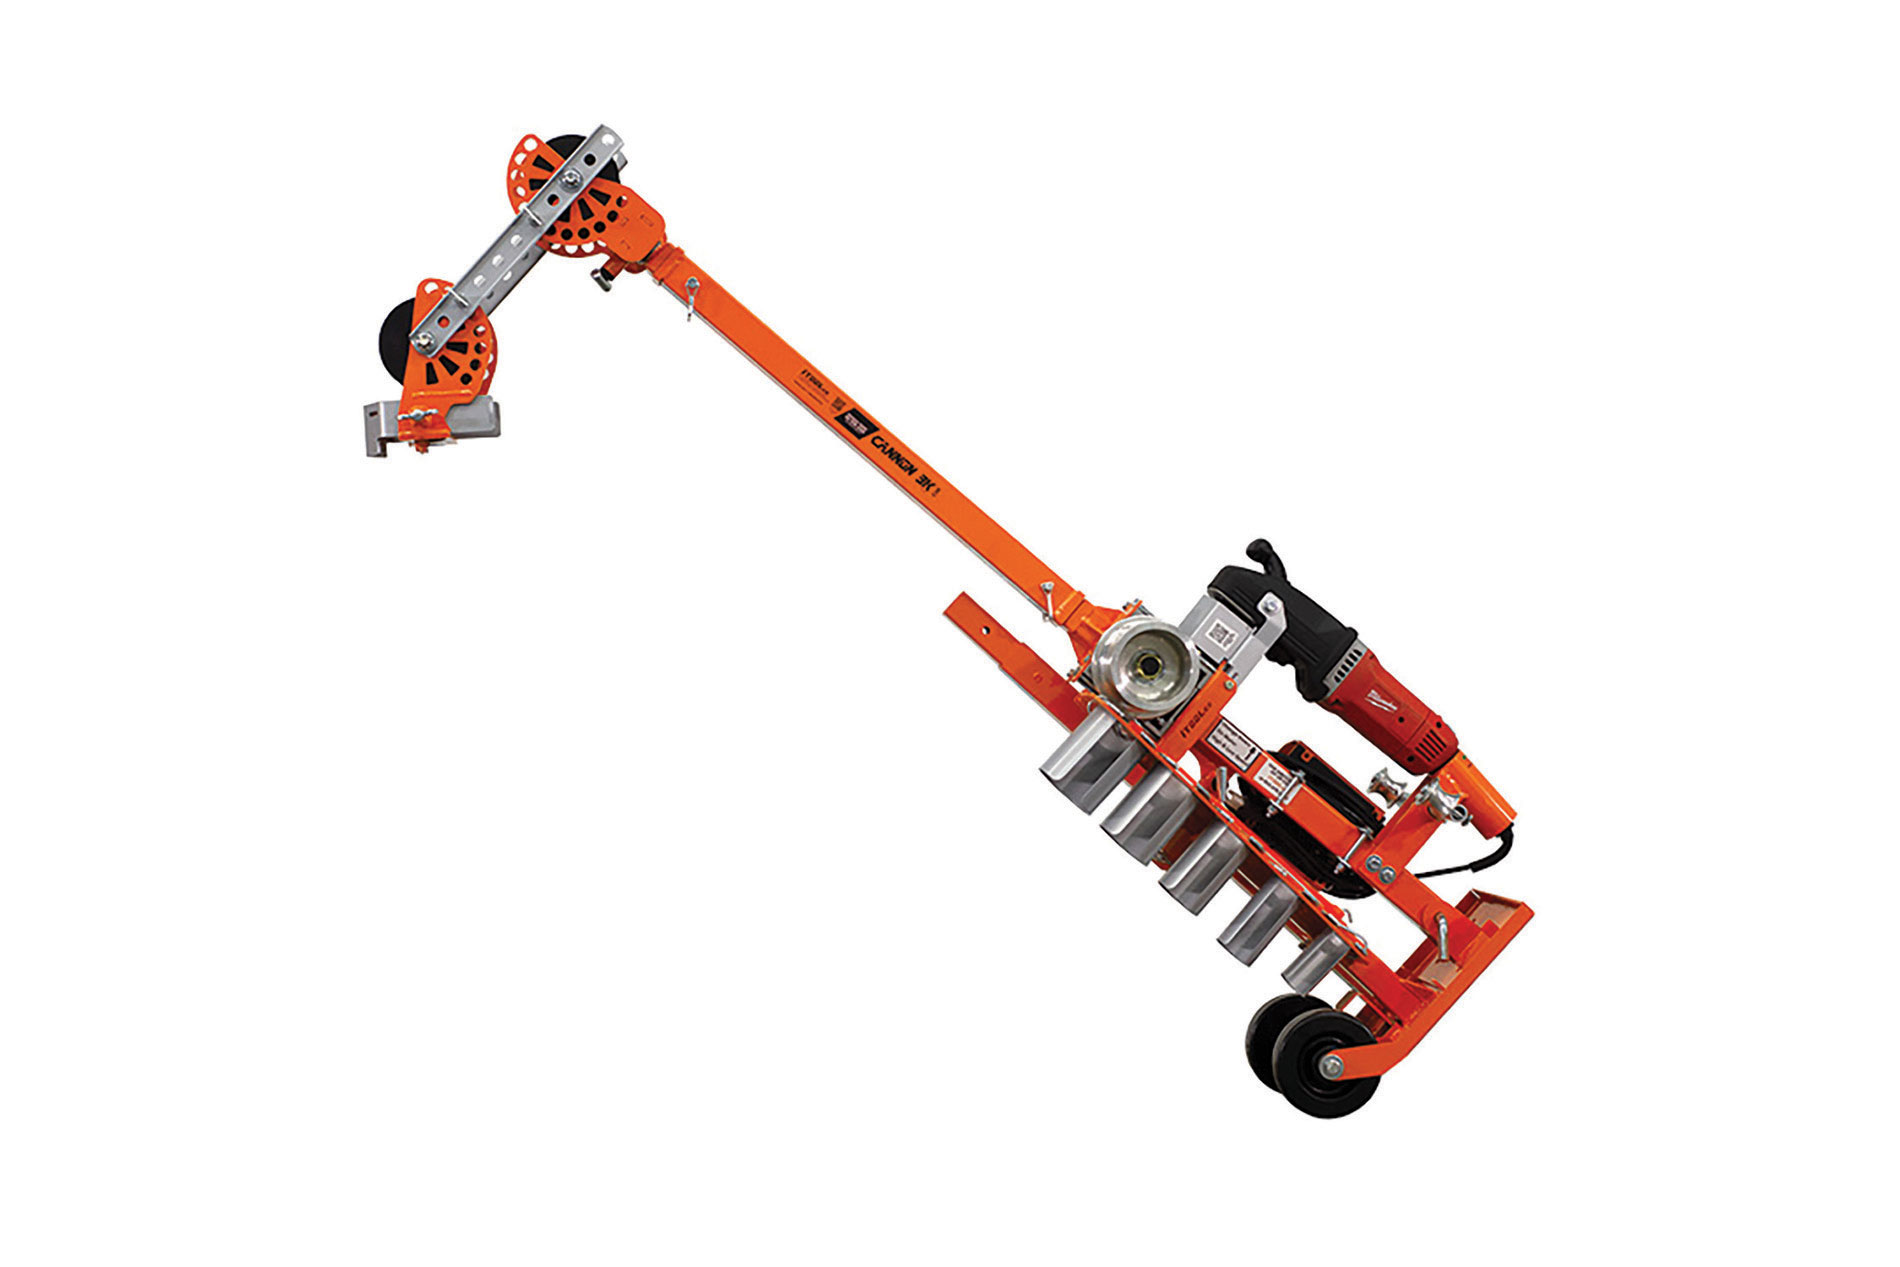 Orange and gray wire puller. Image by iToolco.